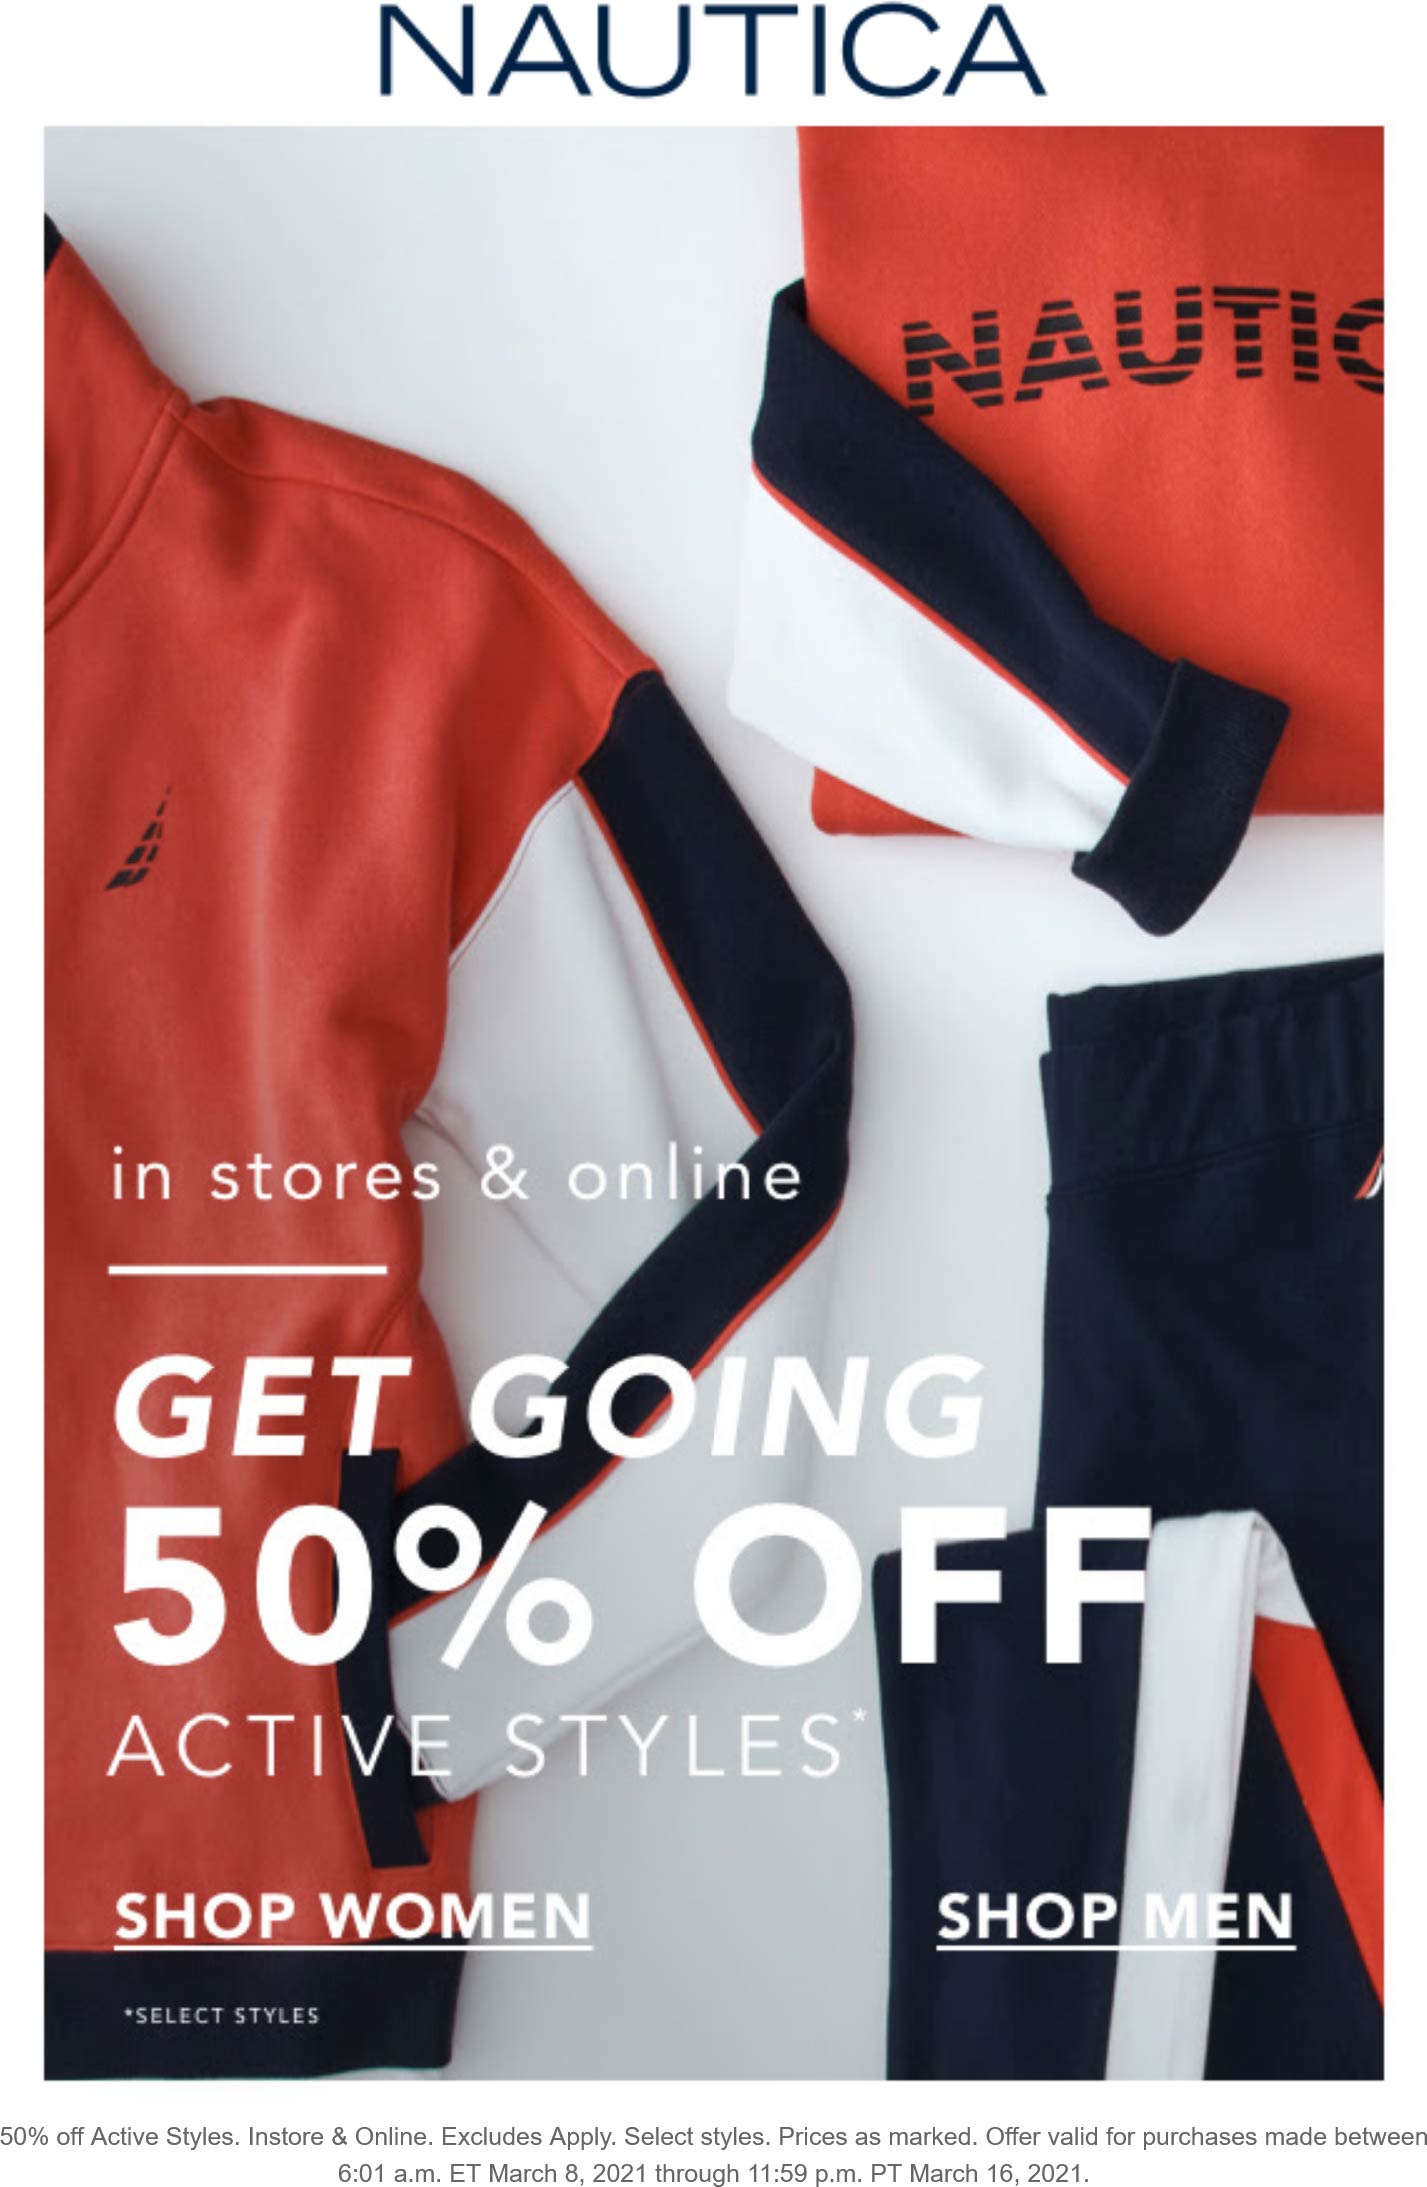 Nautica stores Coupon  50% off active styles at Nautica, ditto online #nautica 